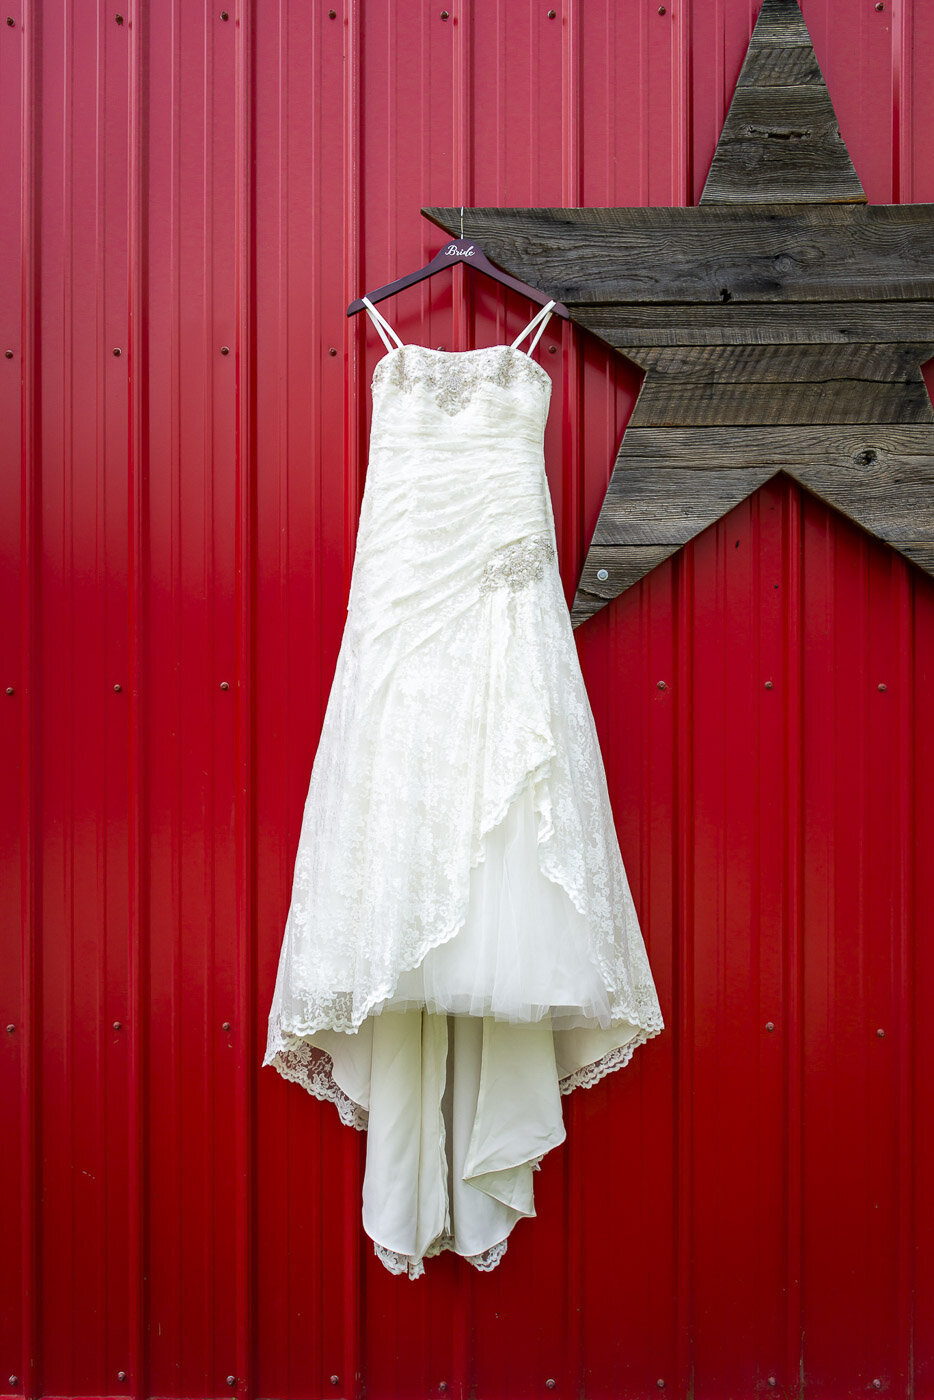 The brides dress hanging on a wooden star on the outside of a red barn.